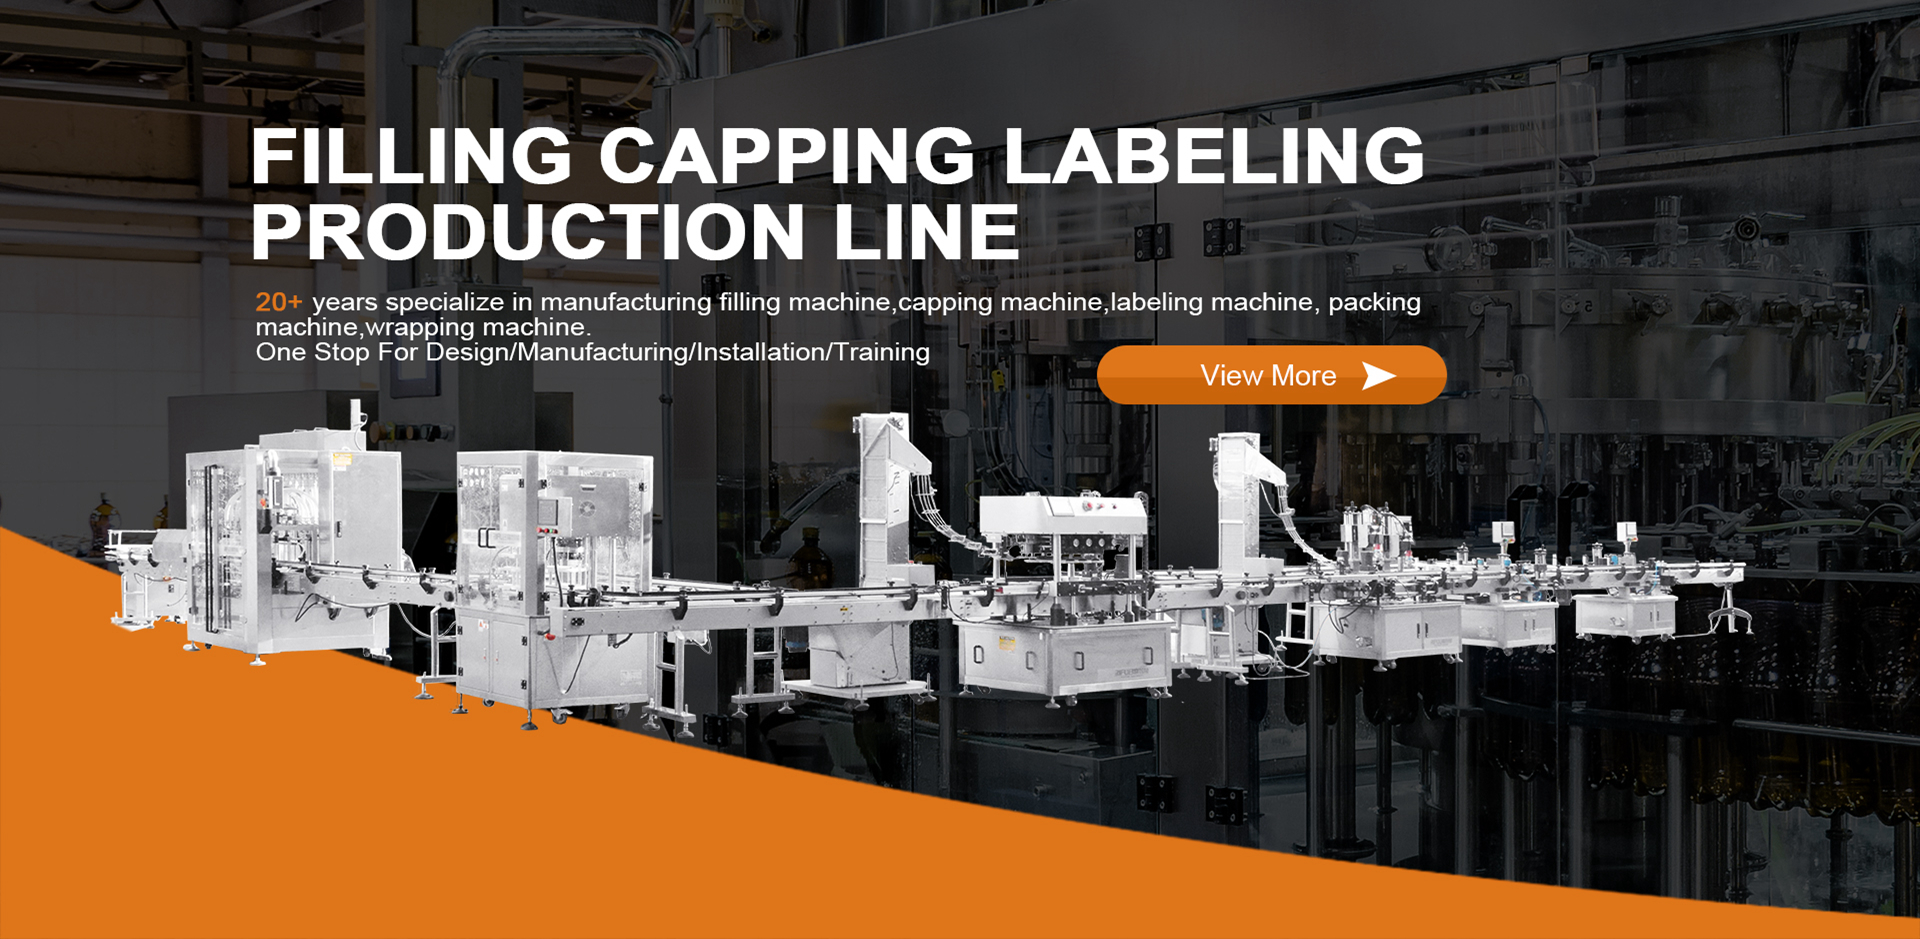 Filling capping labeling production line